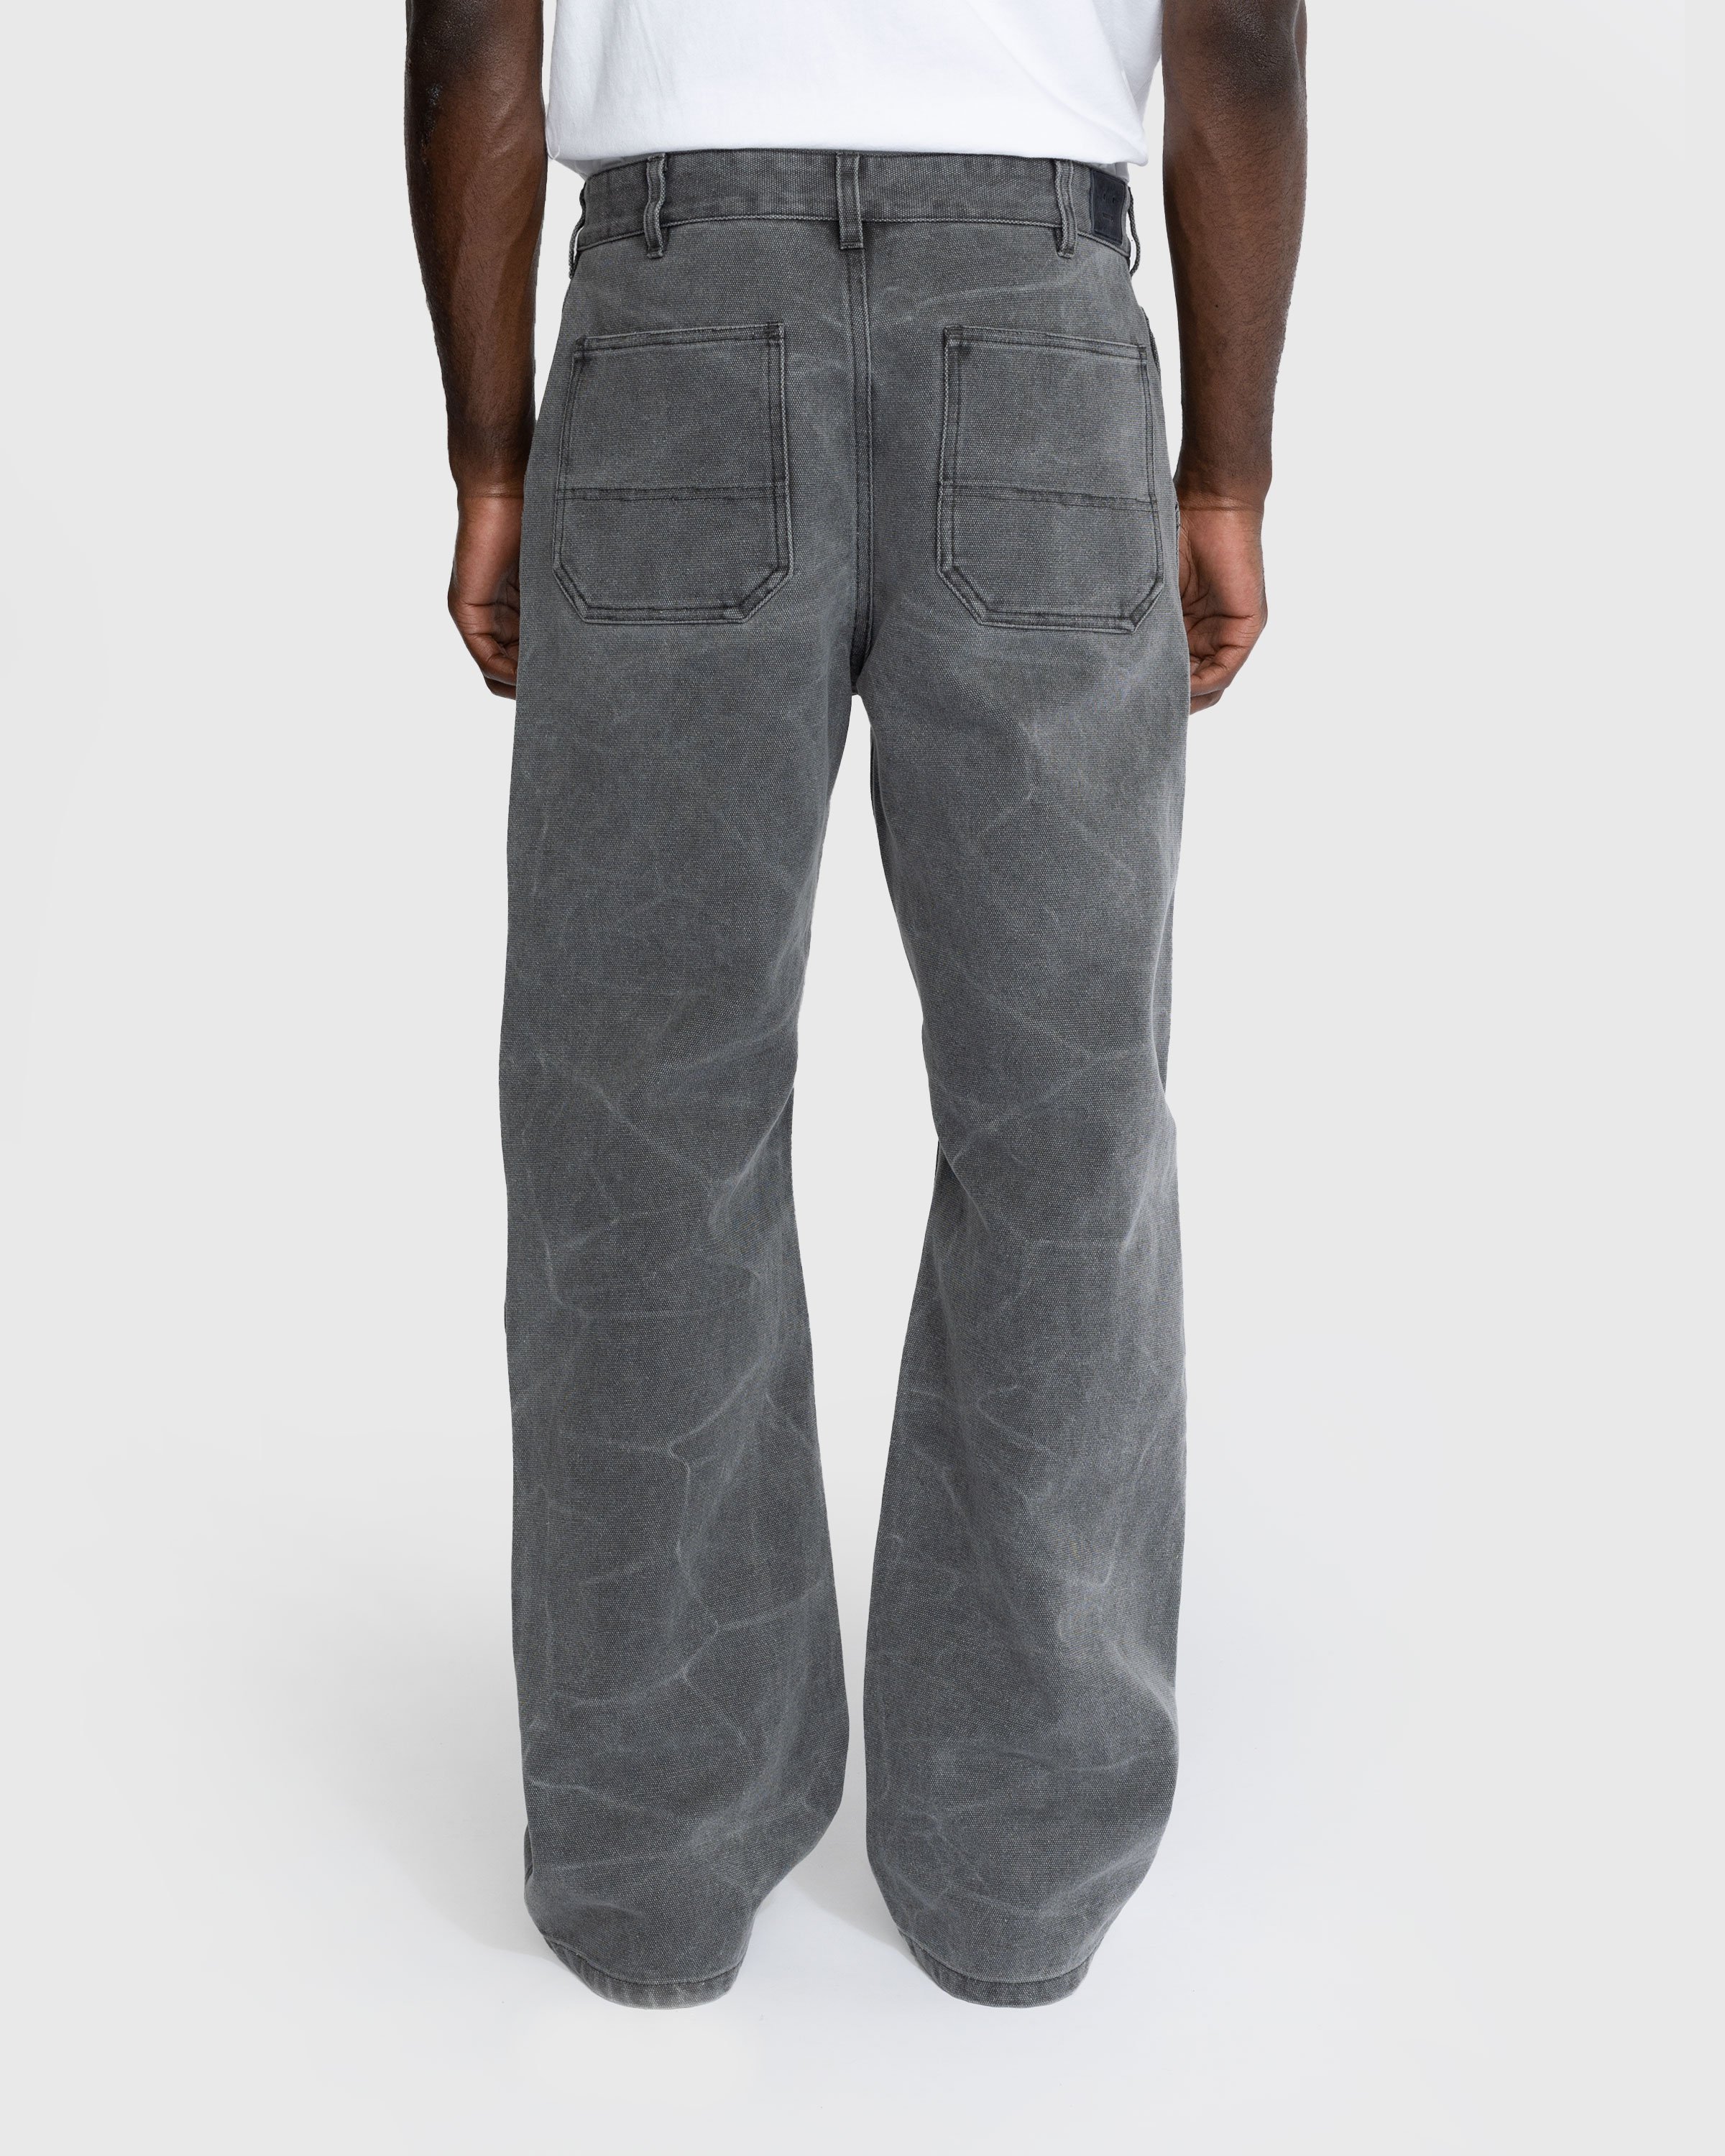 Acne Studios - Cotton Canvas Trousers Grey - Clothing - Grey - Image 3